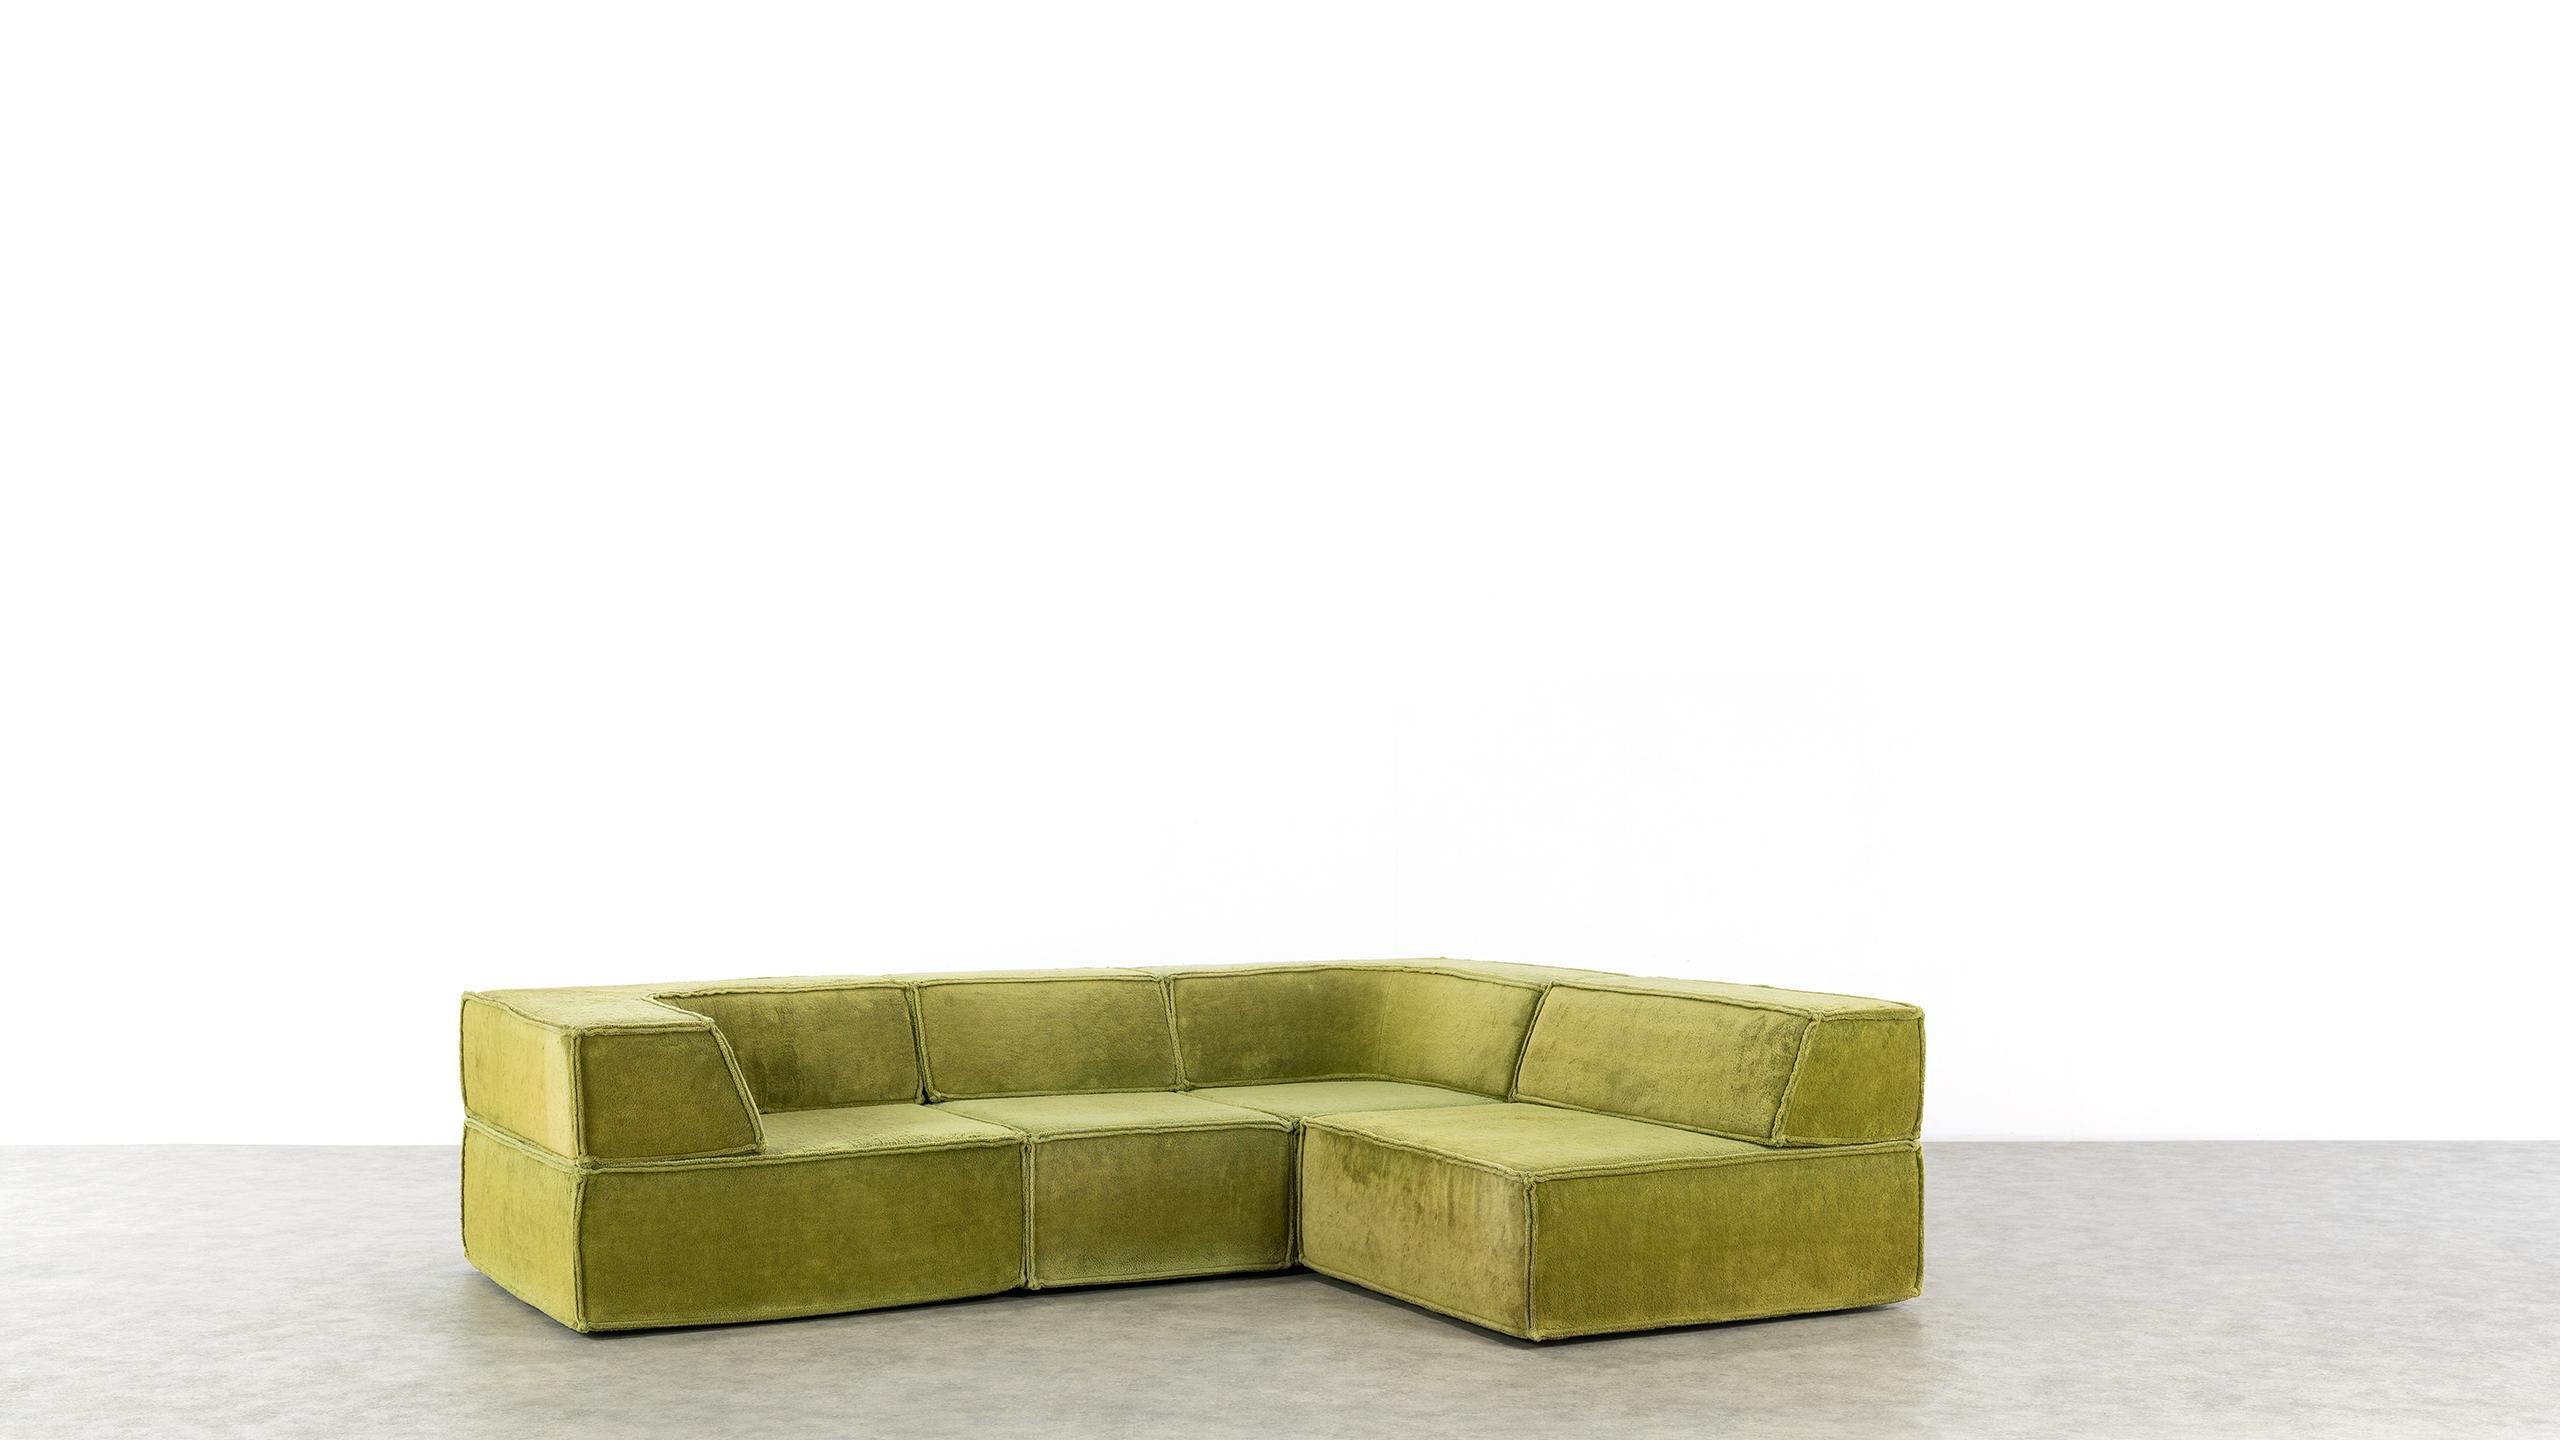 COR Trio Modular Sofa, Giant Landscape in Green, 1972 by Team Form Ag, Swiss 5